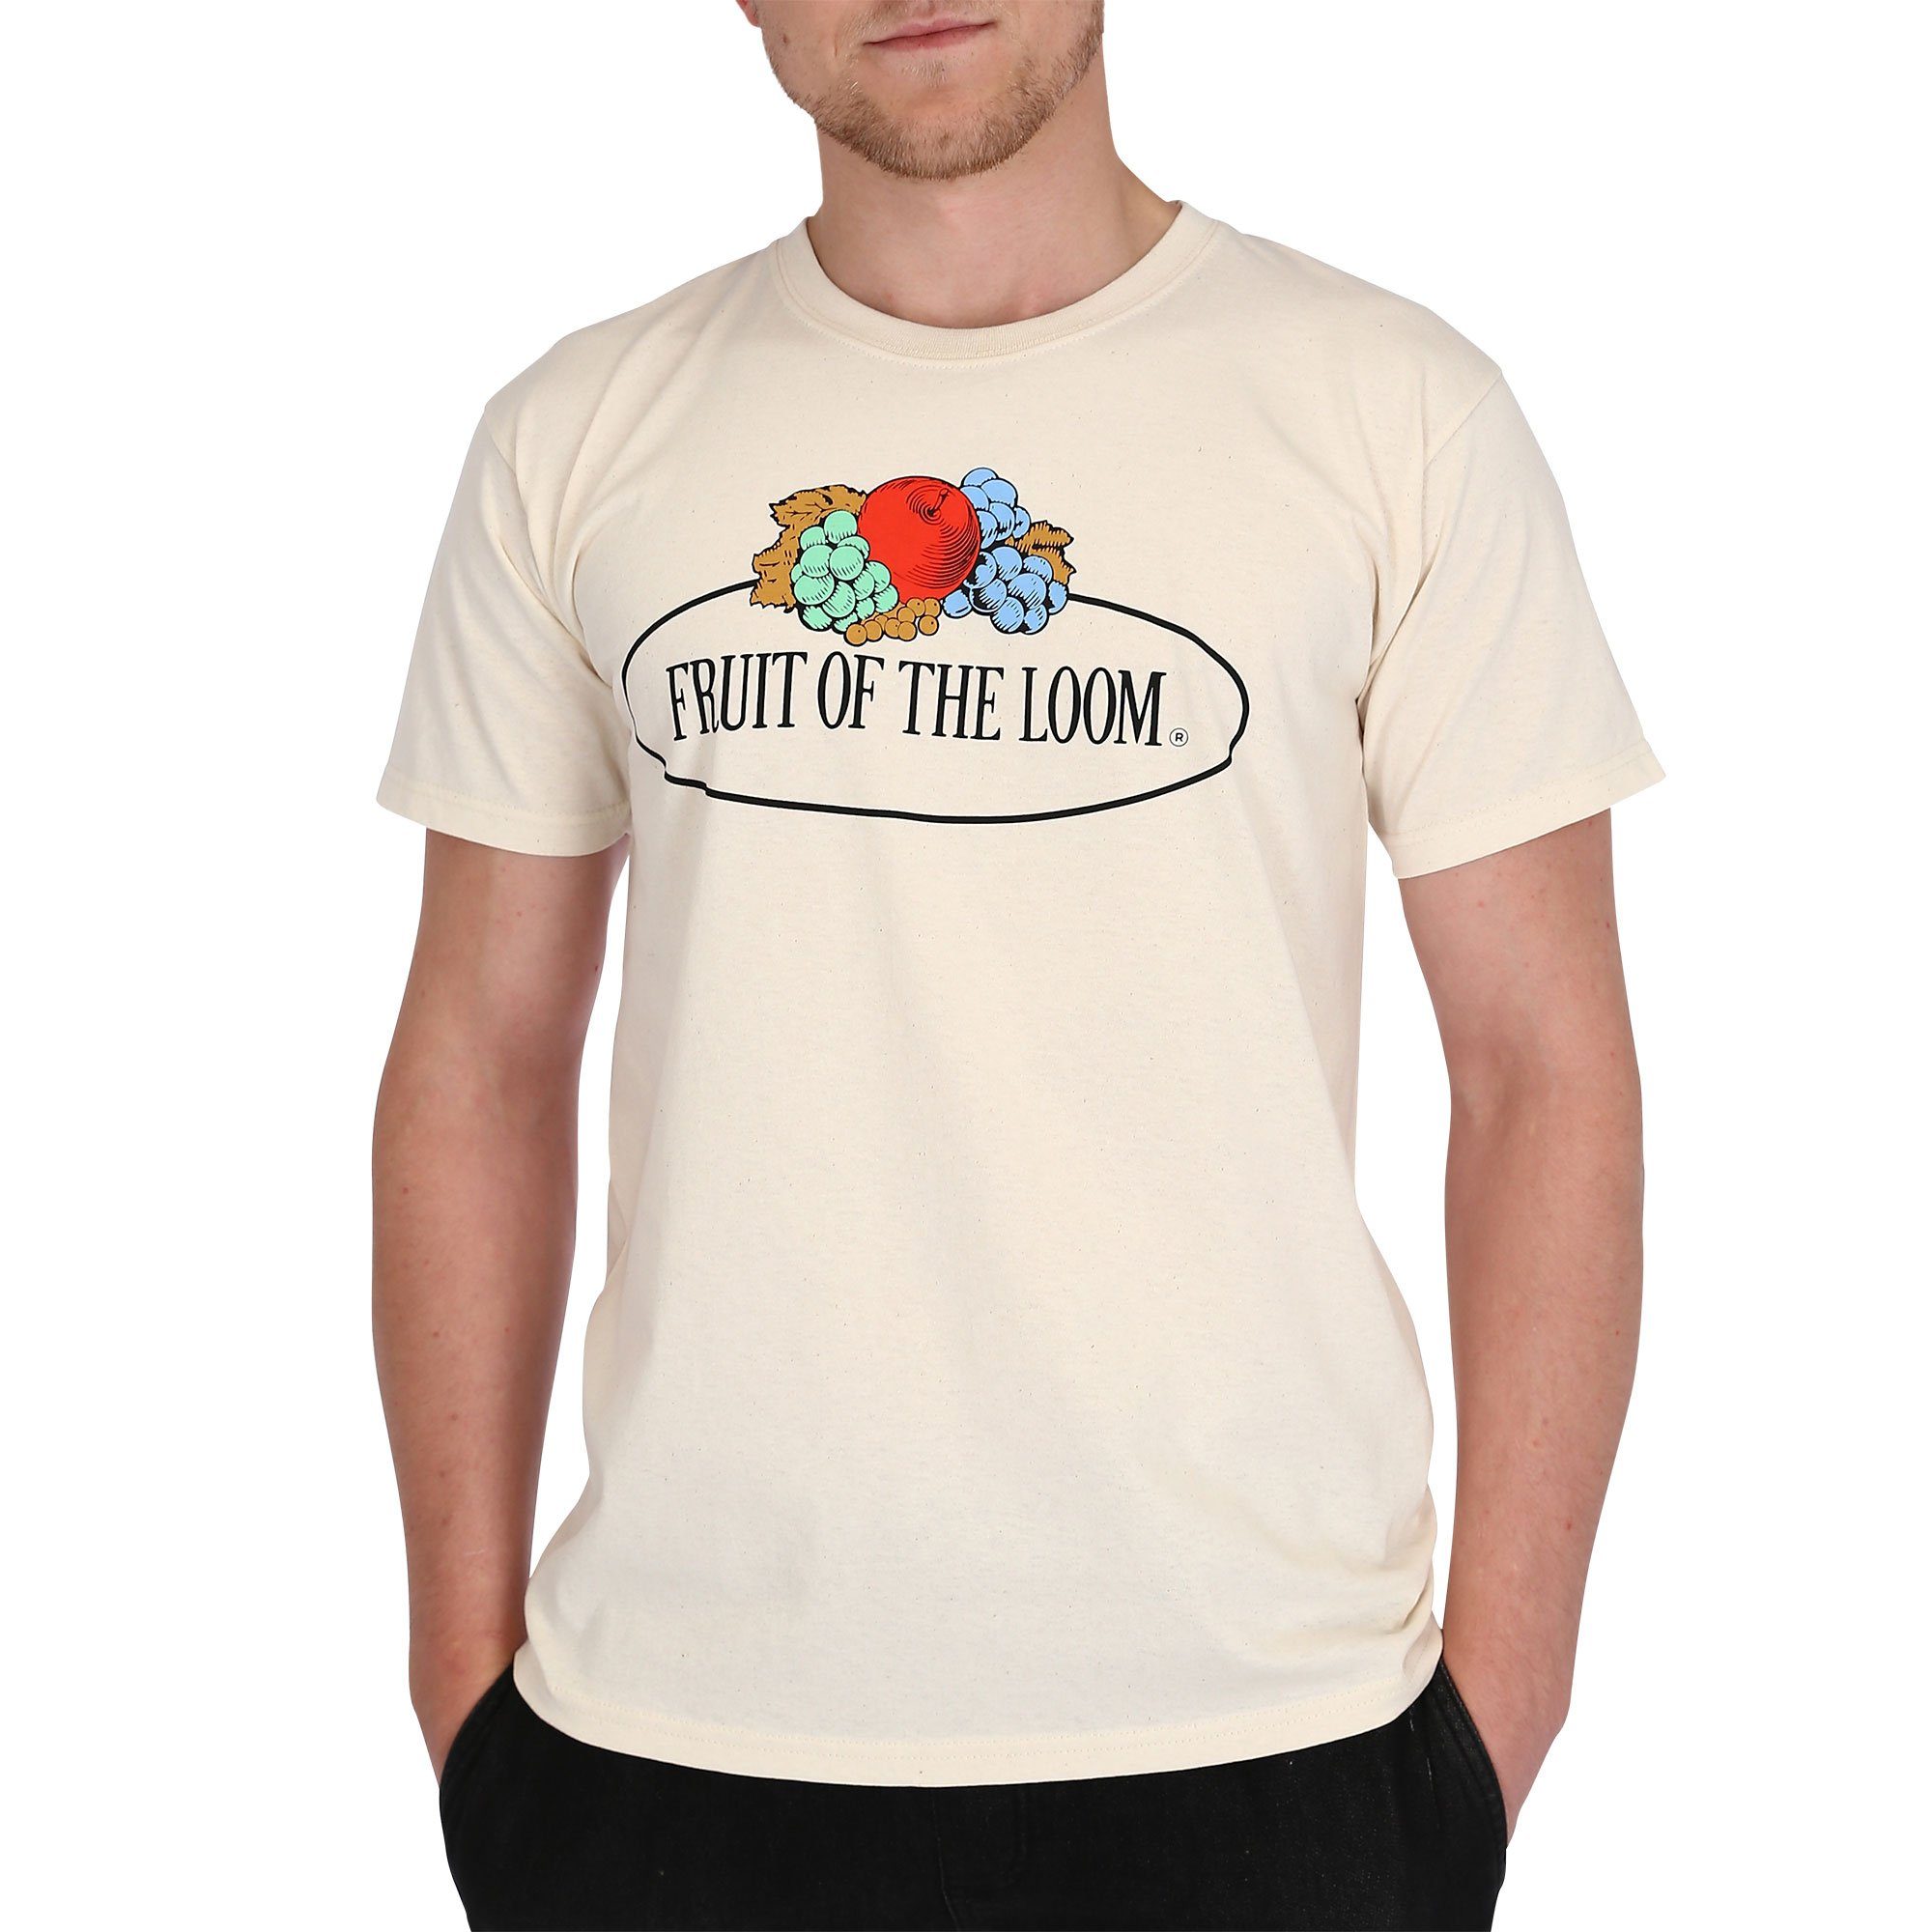 Fruit of the Loom Rundhalsshirt Fruit of the Loom Fruit of the Loom T-Shirt mit Vintage Logo natur